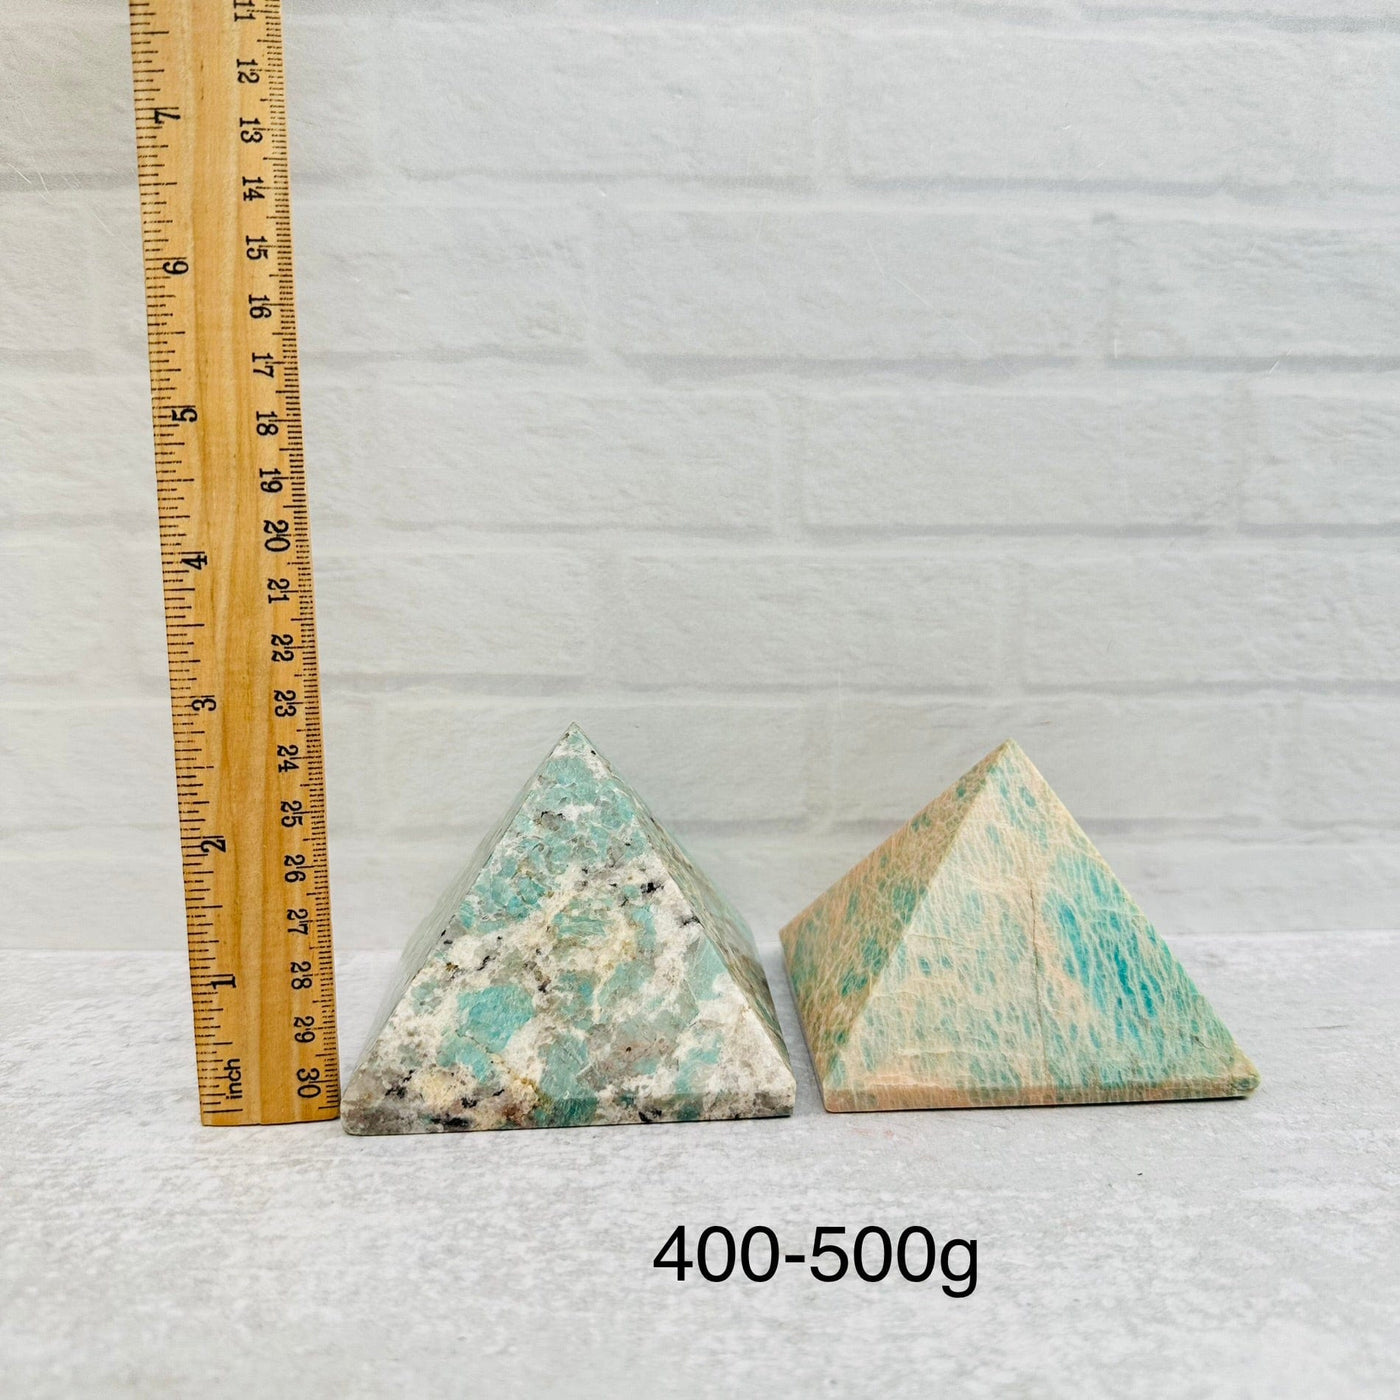 Amazonite Crystal Pyramids - By Weight - next to a ruler for size reference 